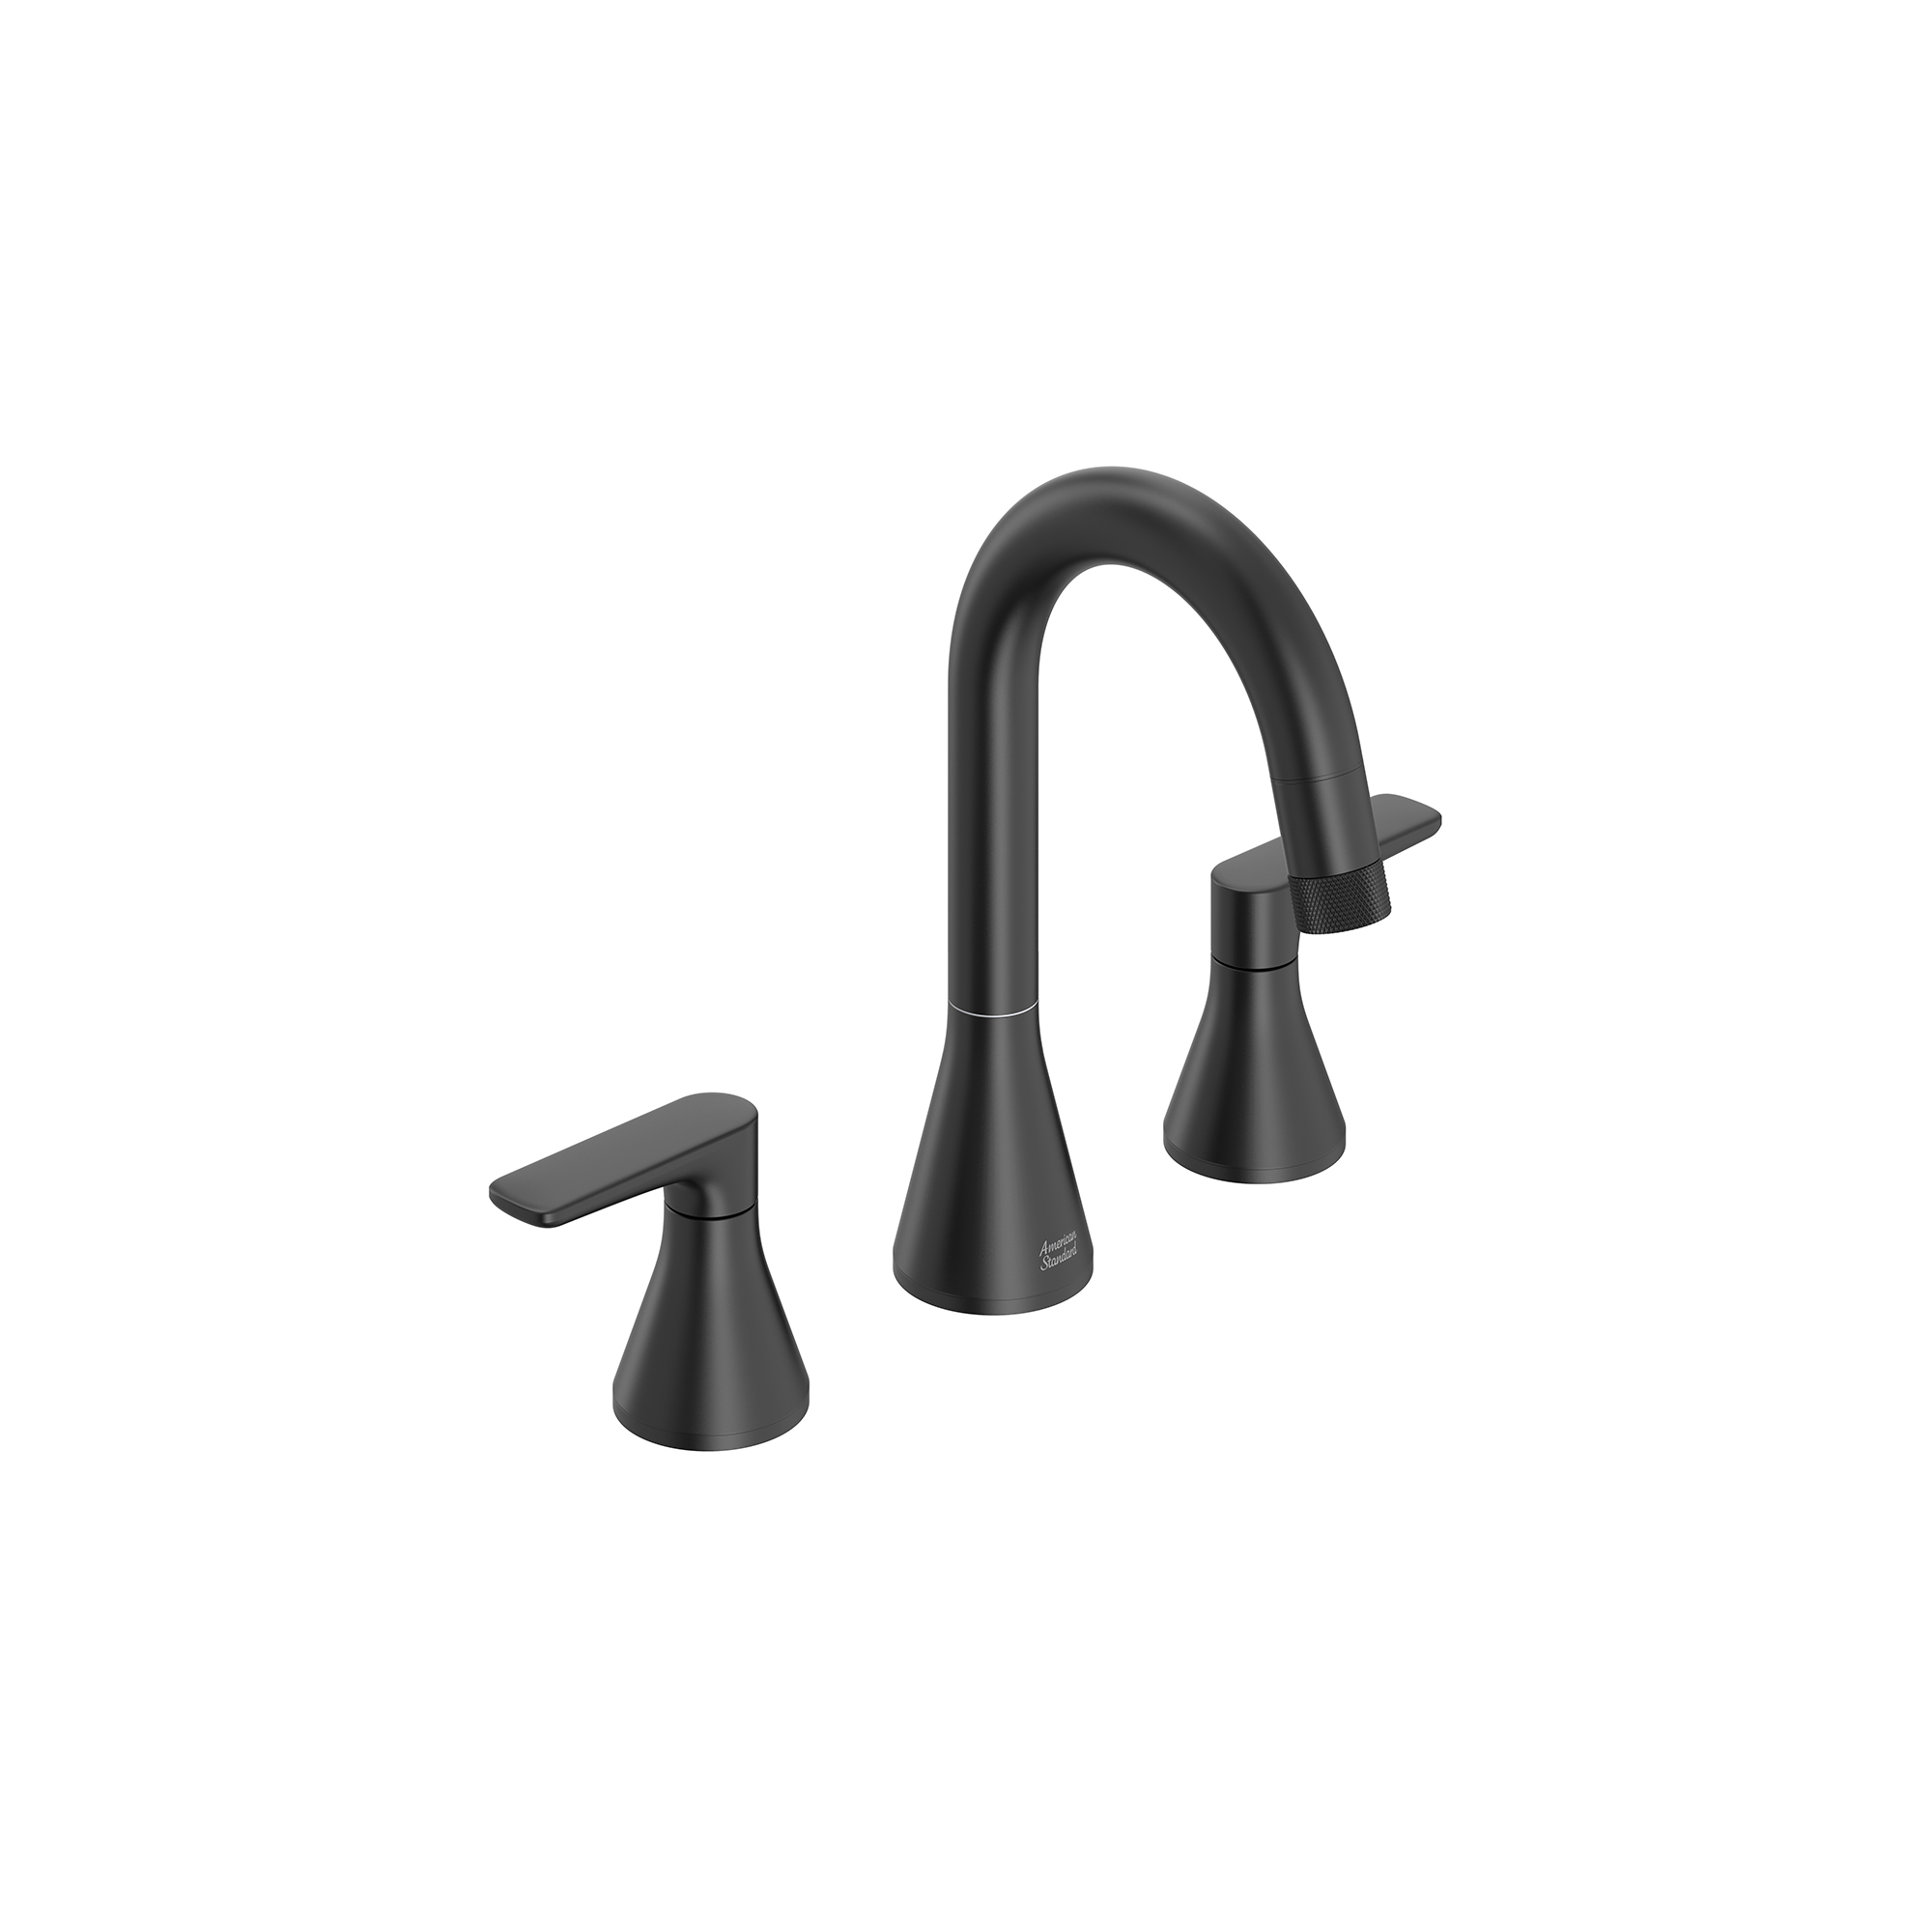 Aspirations™ 8-Inch Widespread 2-Handle Pull-Down Bathroom Faucet 1.2 gpm/4.5 L/min With Lever Handles